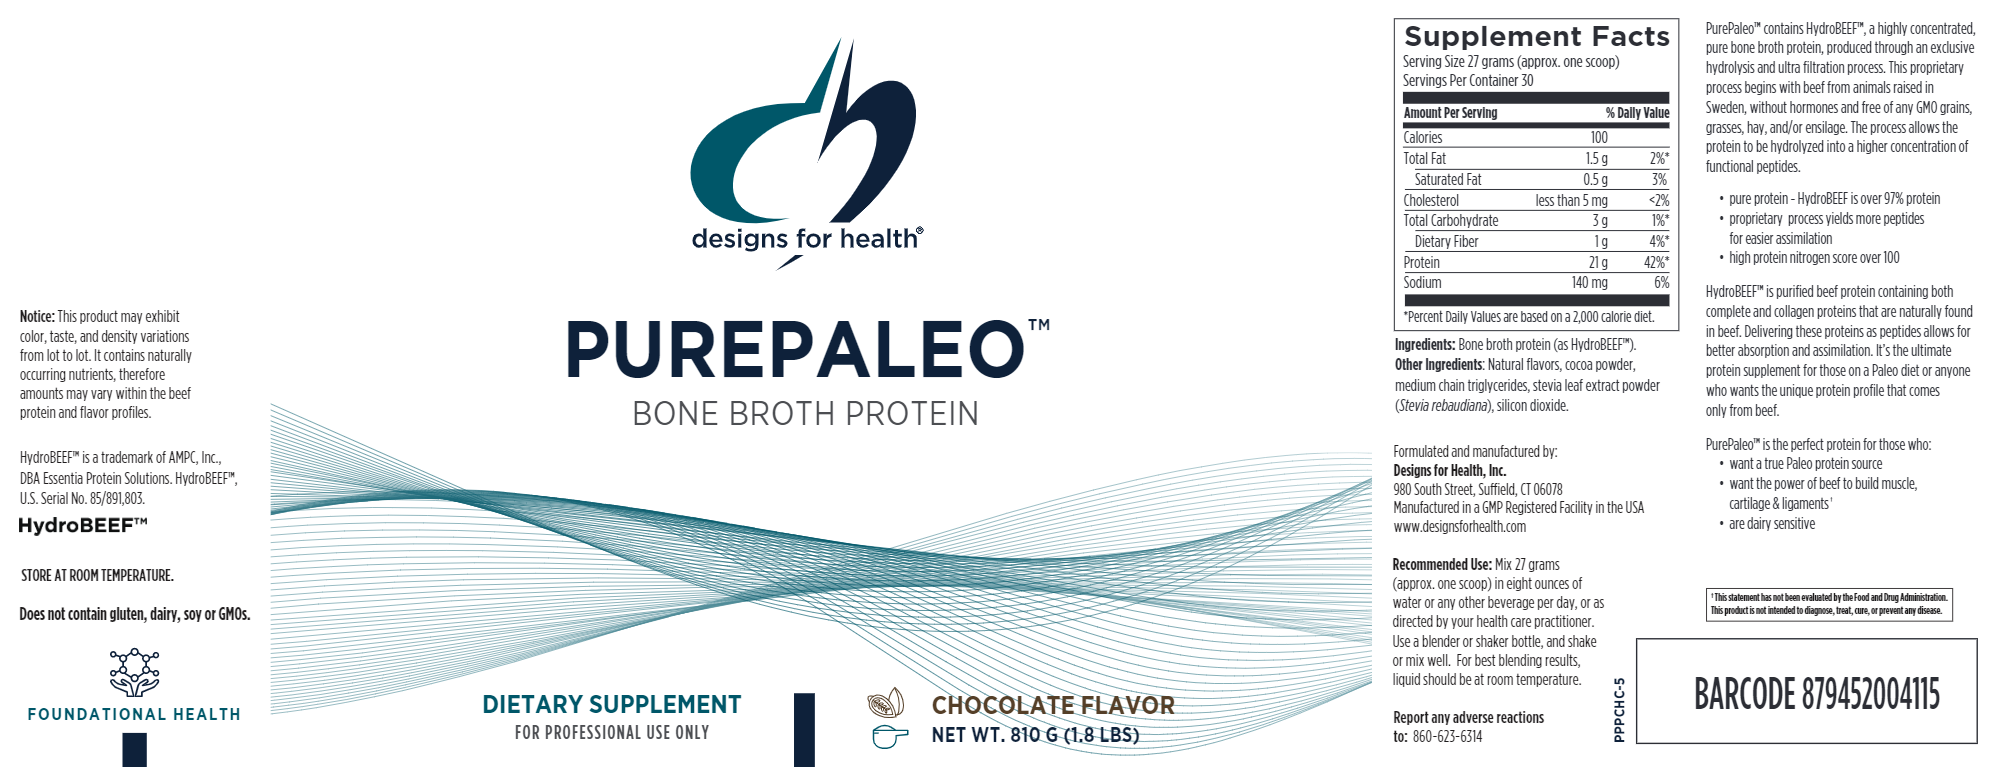 PurePaleo™ contains HydroBEEF™, a highly concentrated, pure bone broth protein